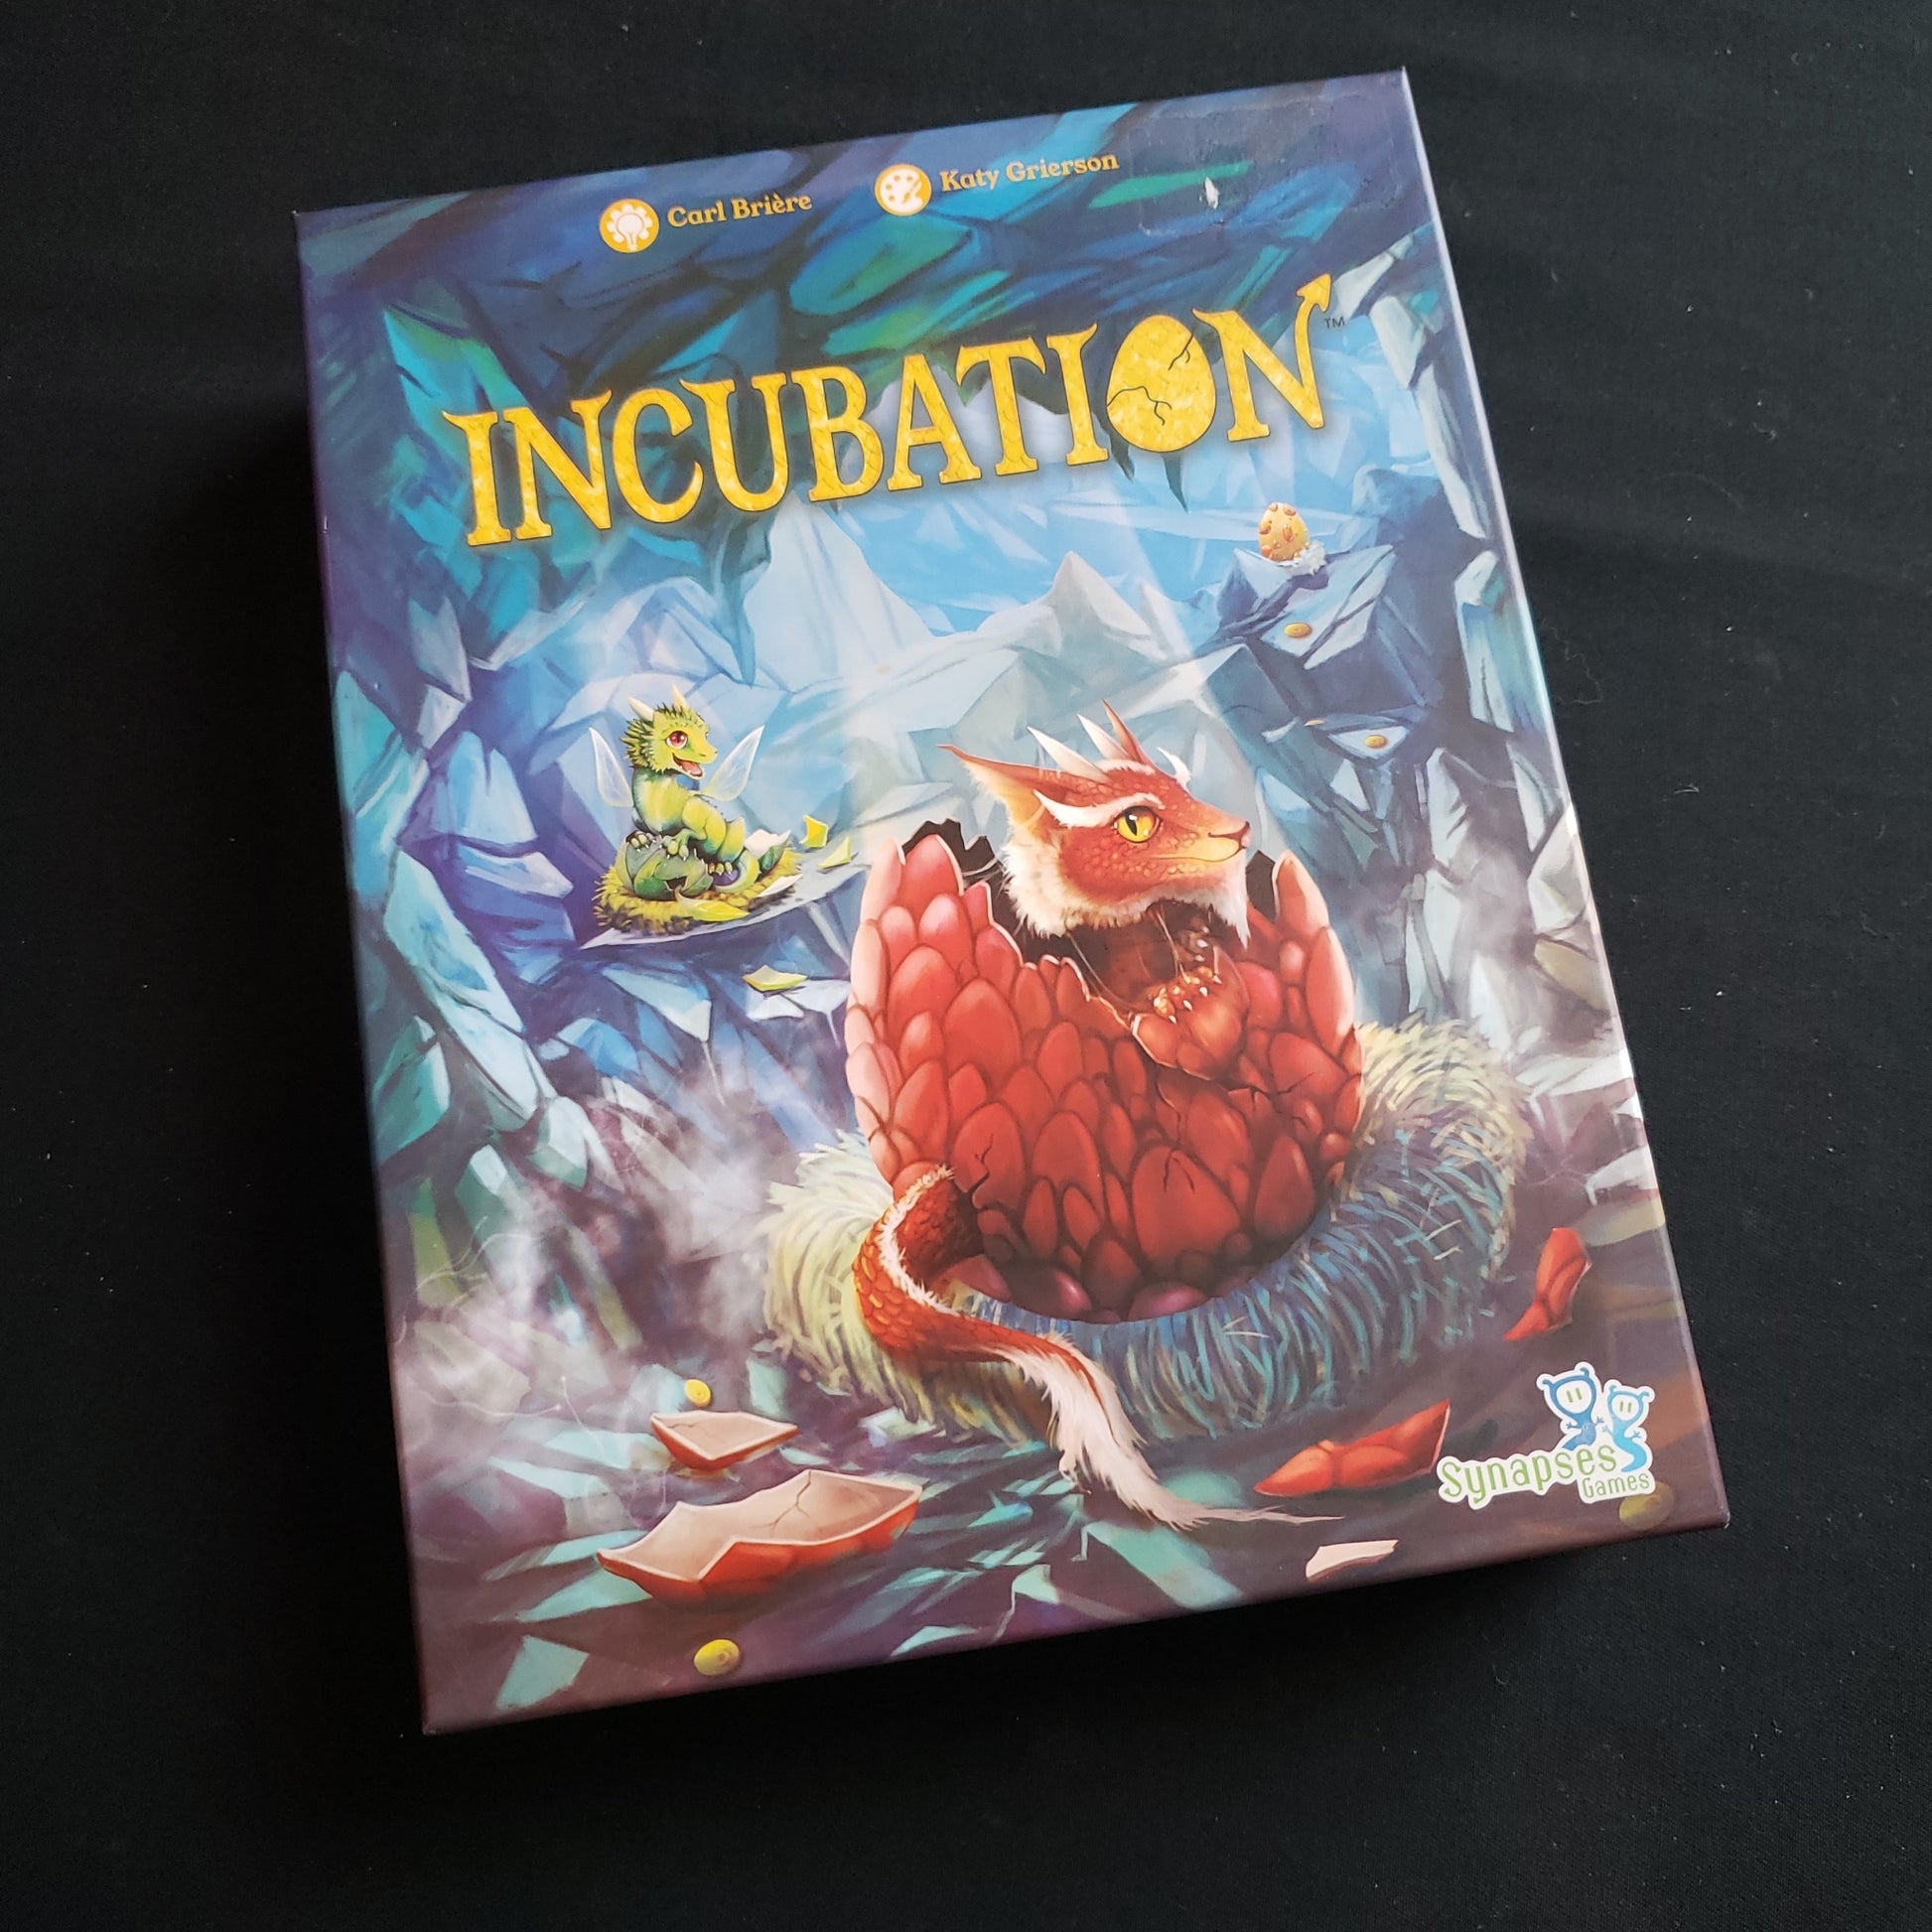 Image shows the front cover of the box of the Incubation board game